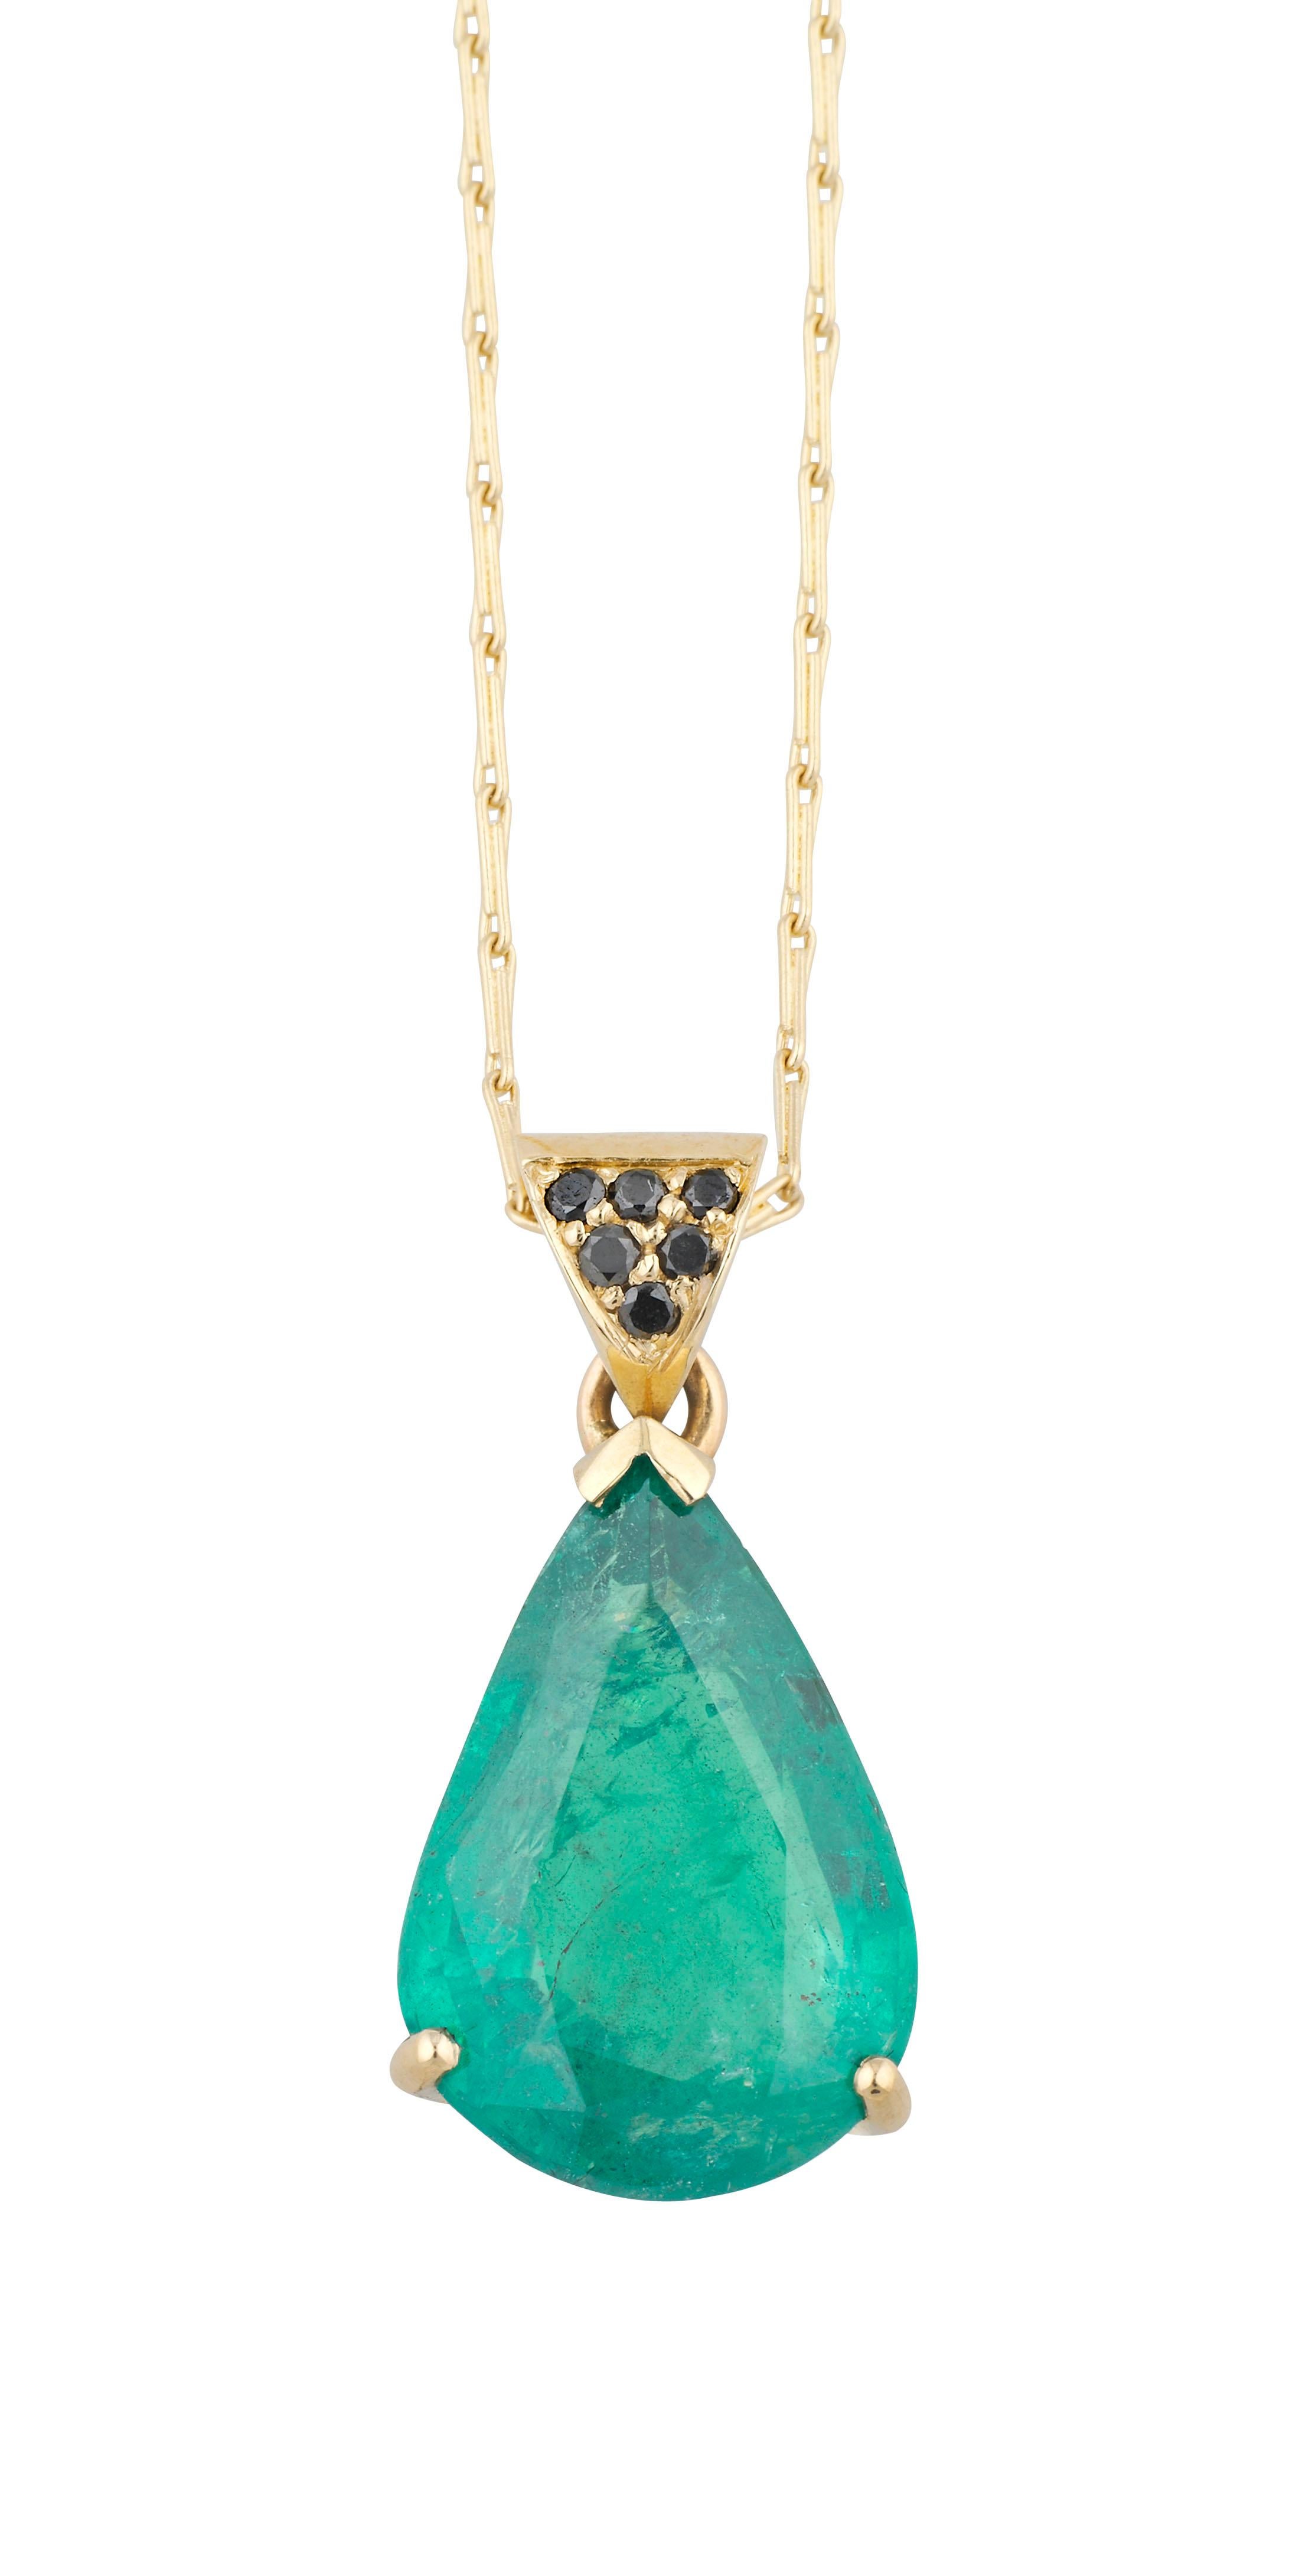 This simple modern handmade British-London Hallmarked 18 karat yellow gold pendant with long chain necklace, set with 6.15 carat pear shaped emerald and black diamond is from MAIKO NAGAYAMA's Haute Couture Collection called 